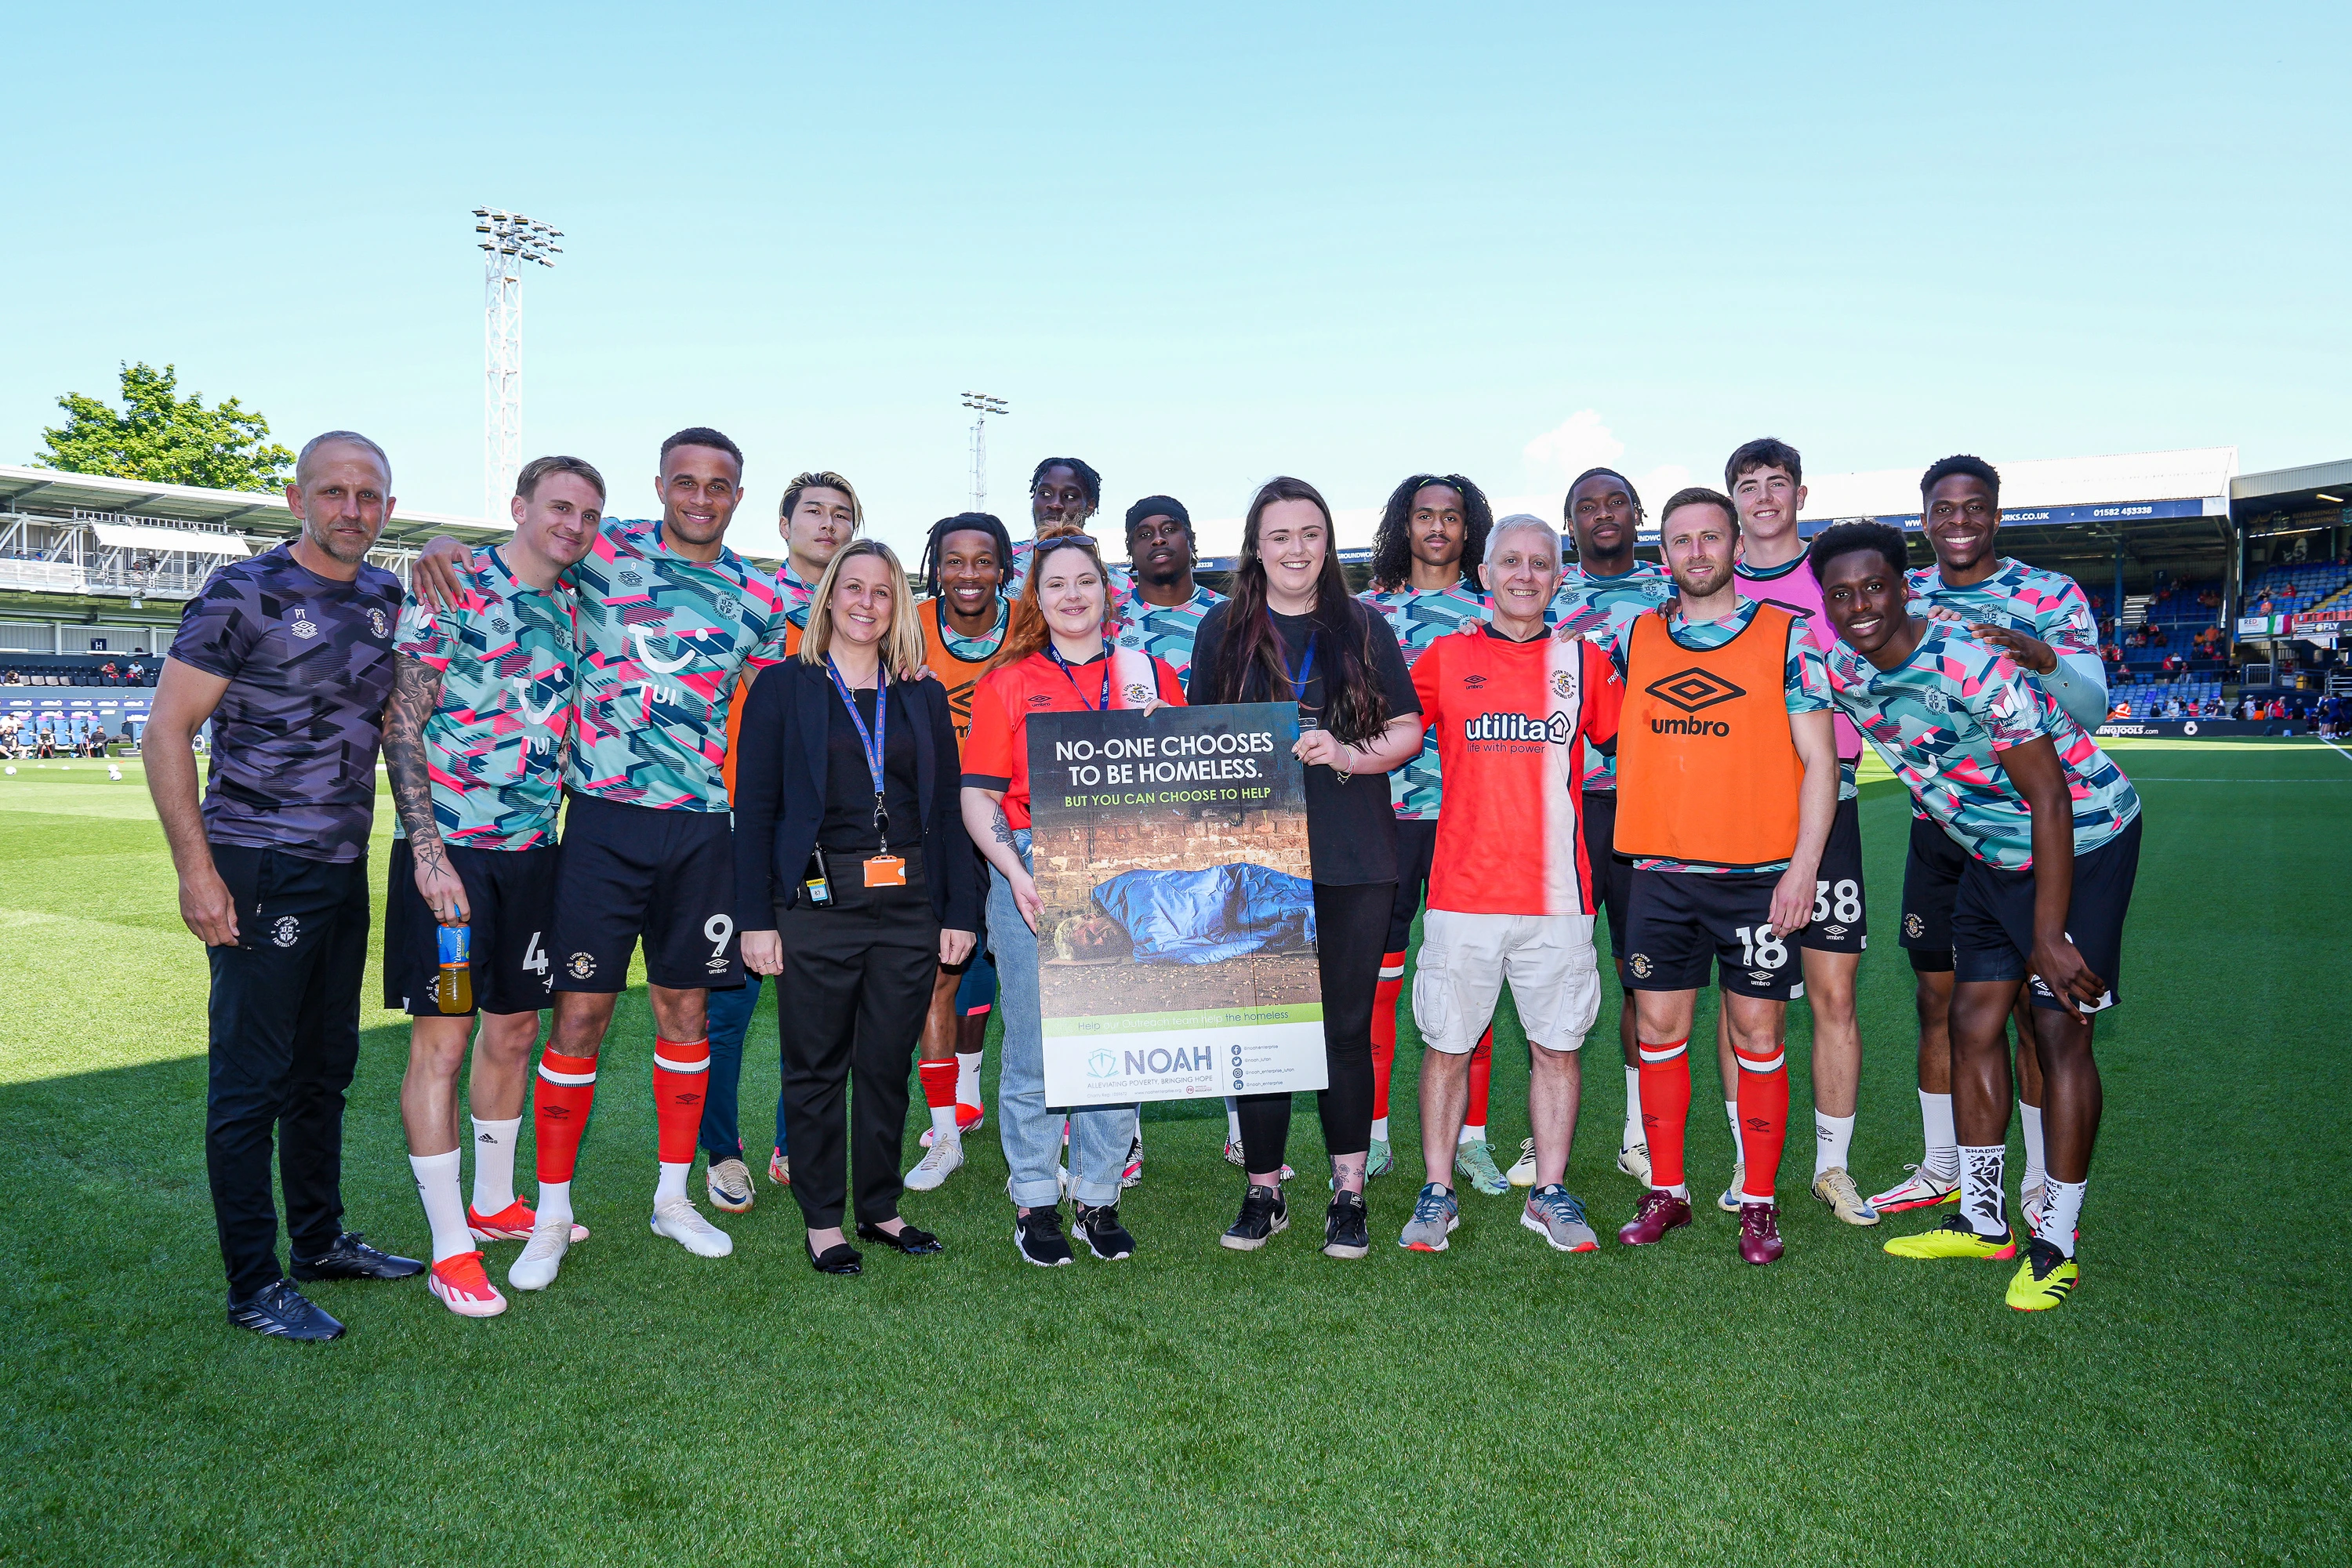 Club Charity of the Year NOAH on pitch presentation with the Luton Town squad and staff.